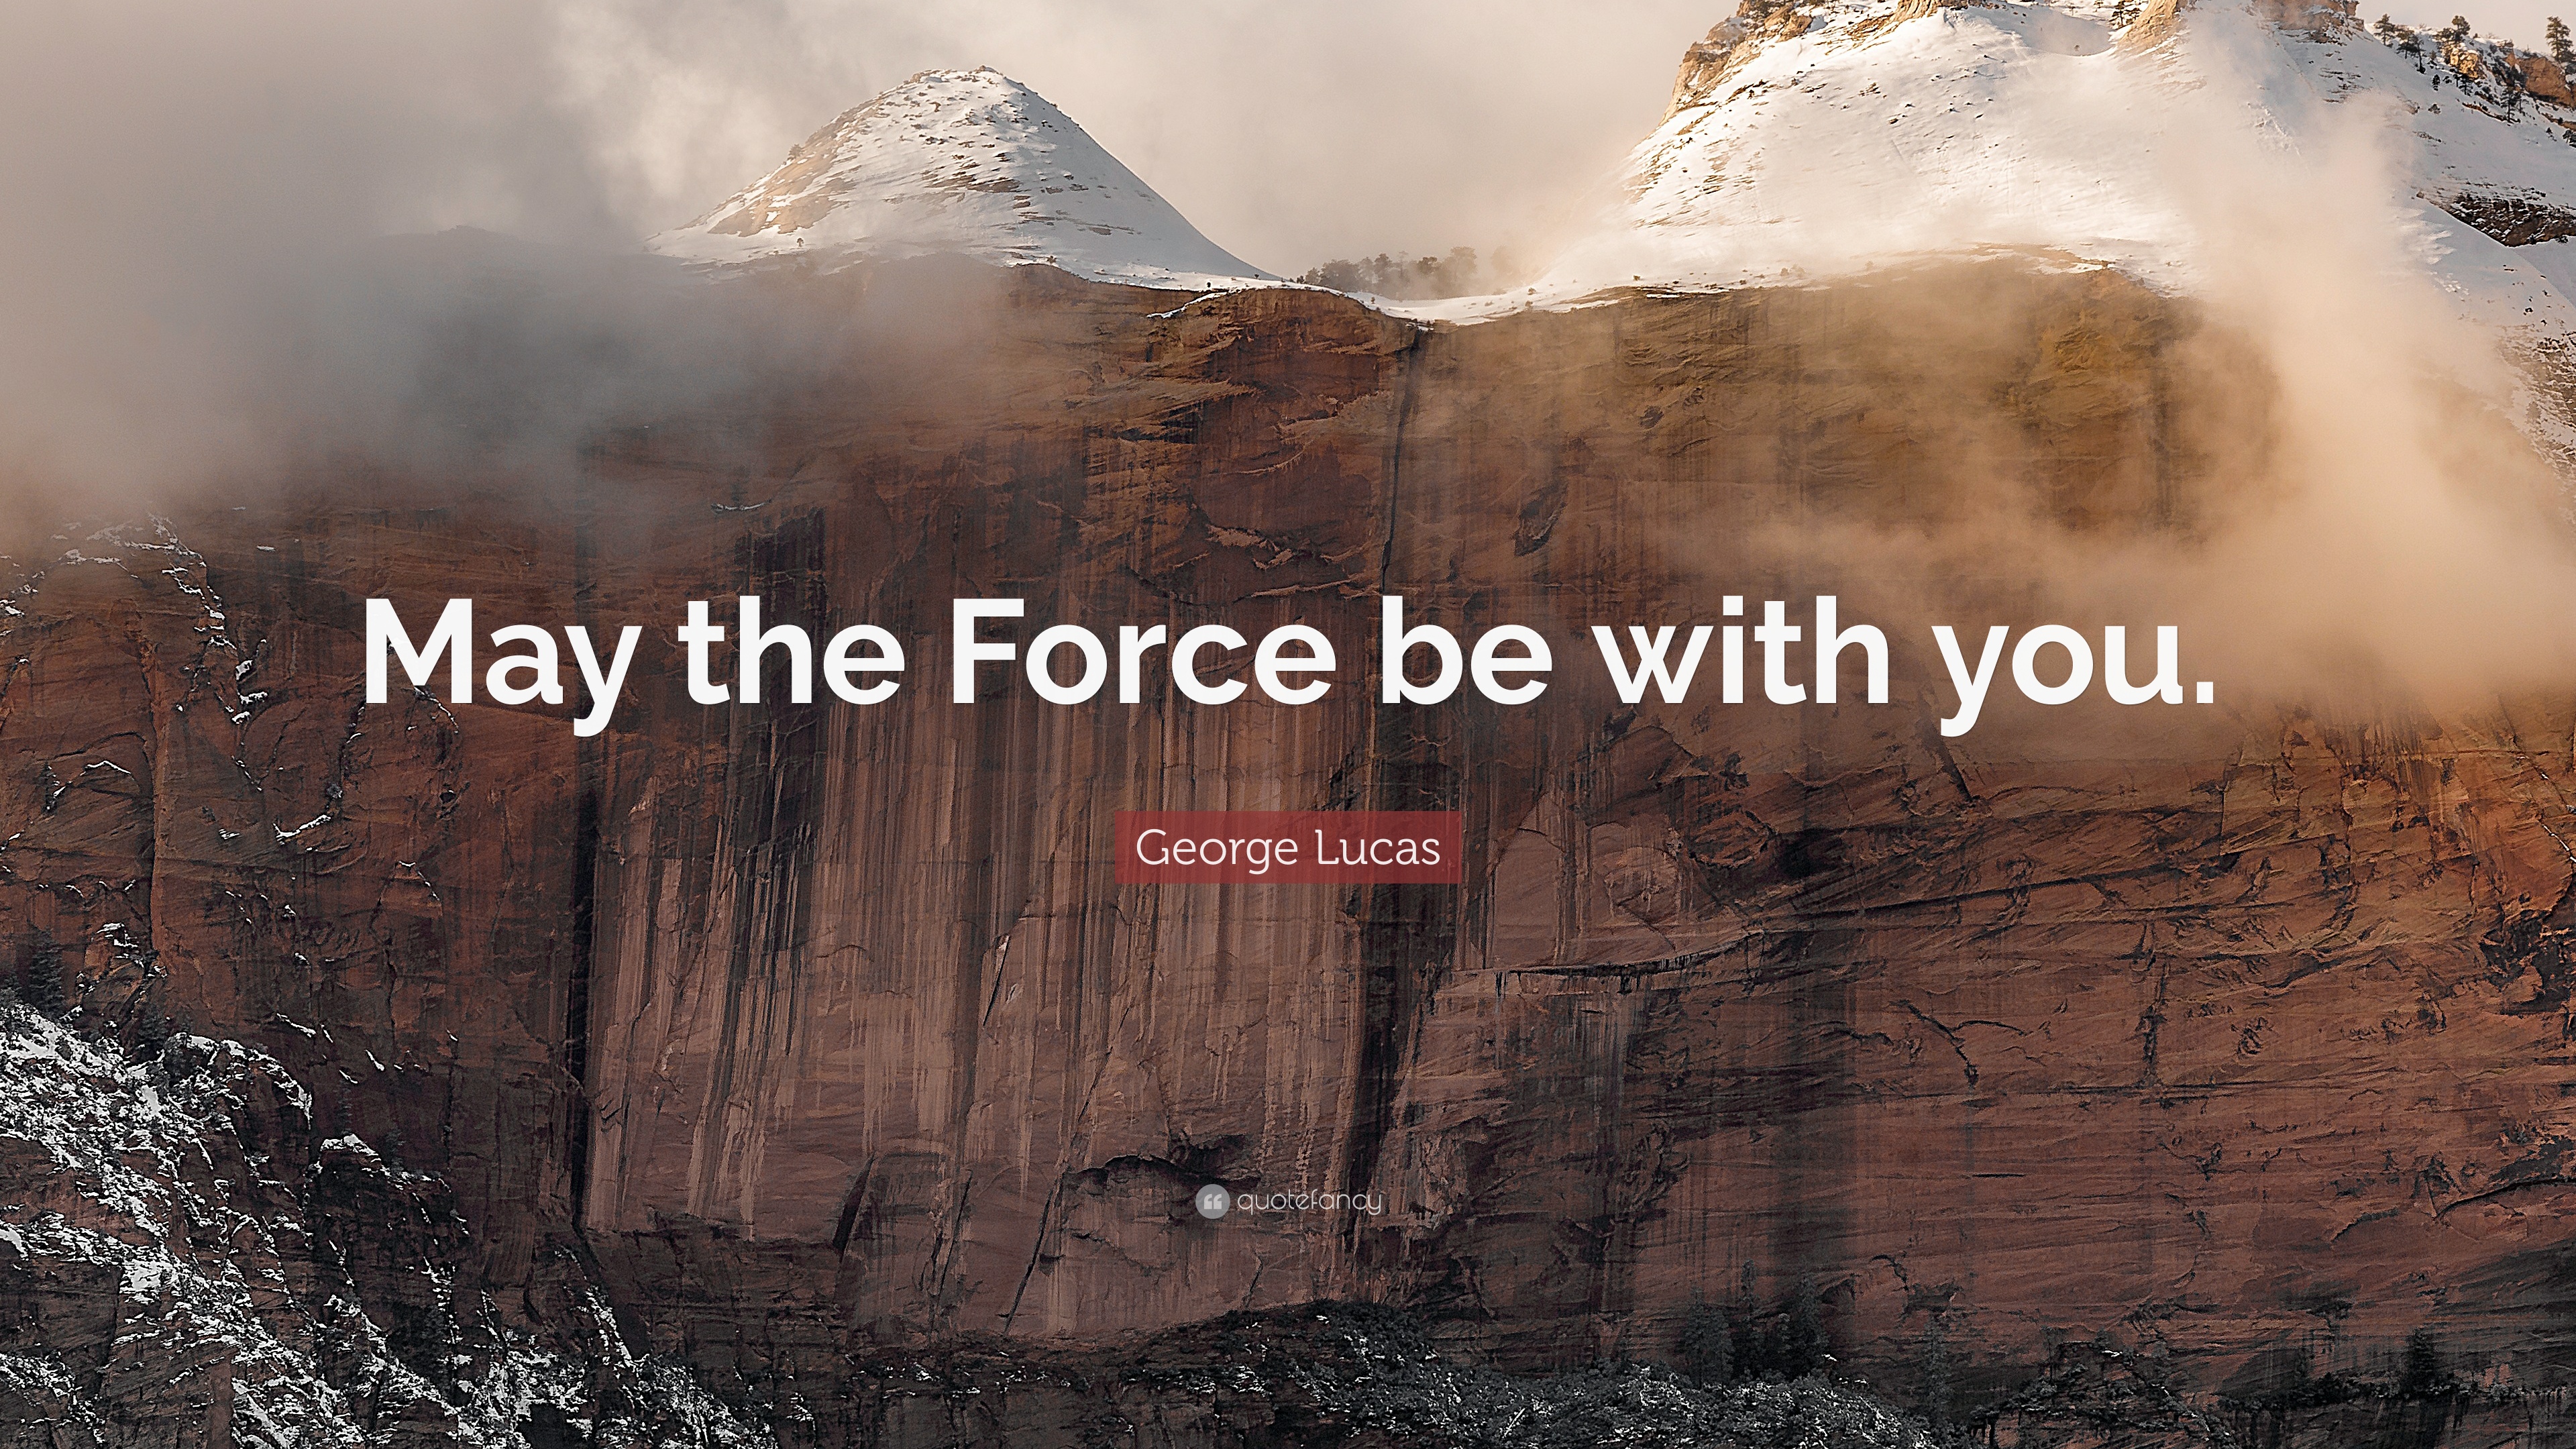 may the force be with you wallpaper,nature,natural landscape,text,font,atmospheric phenomenon